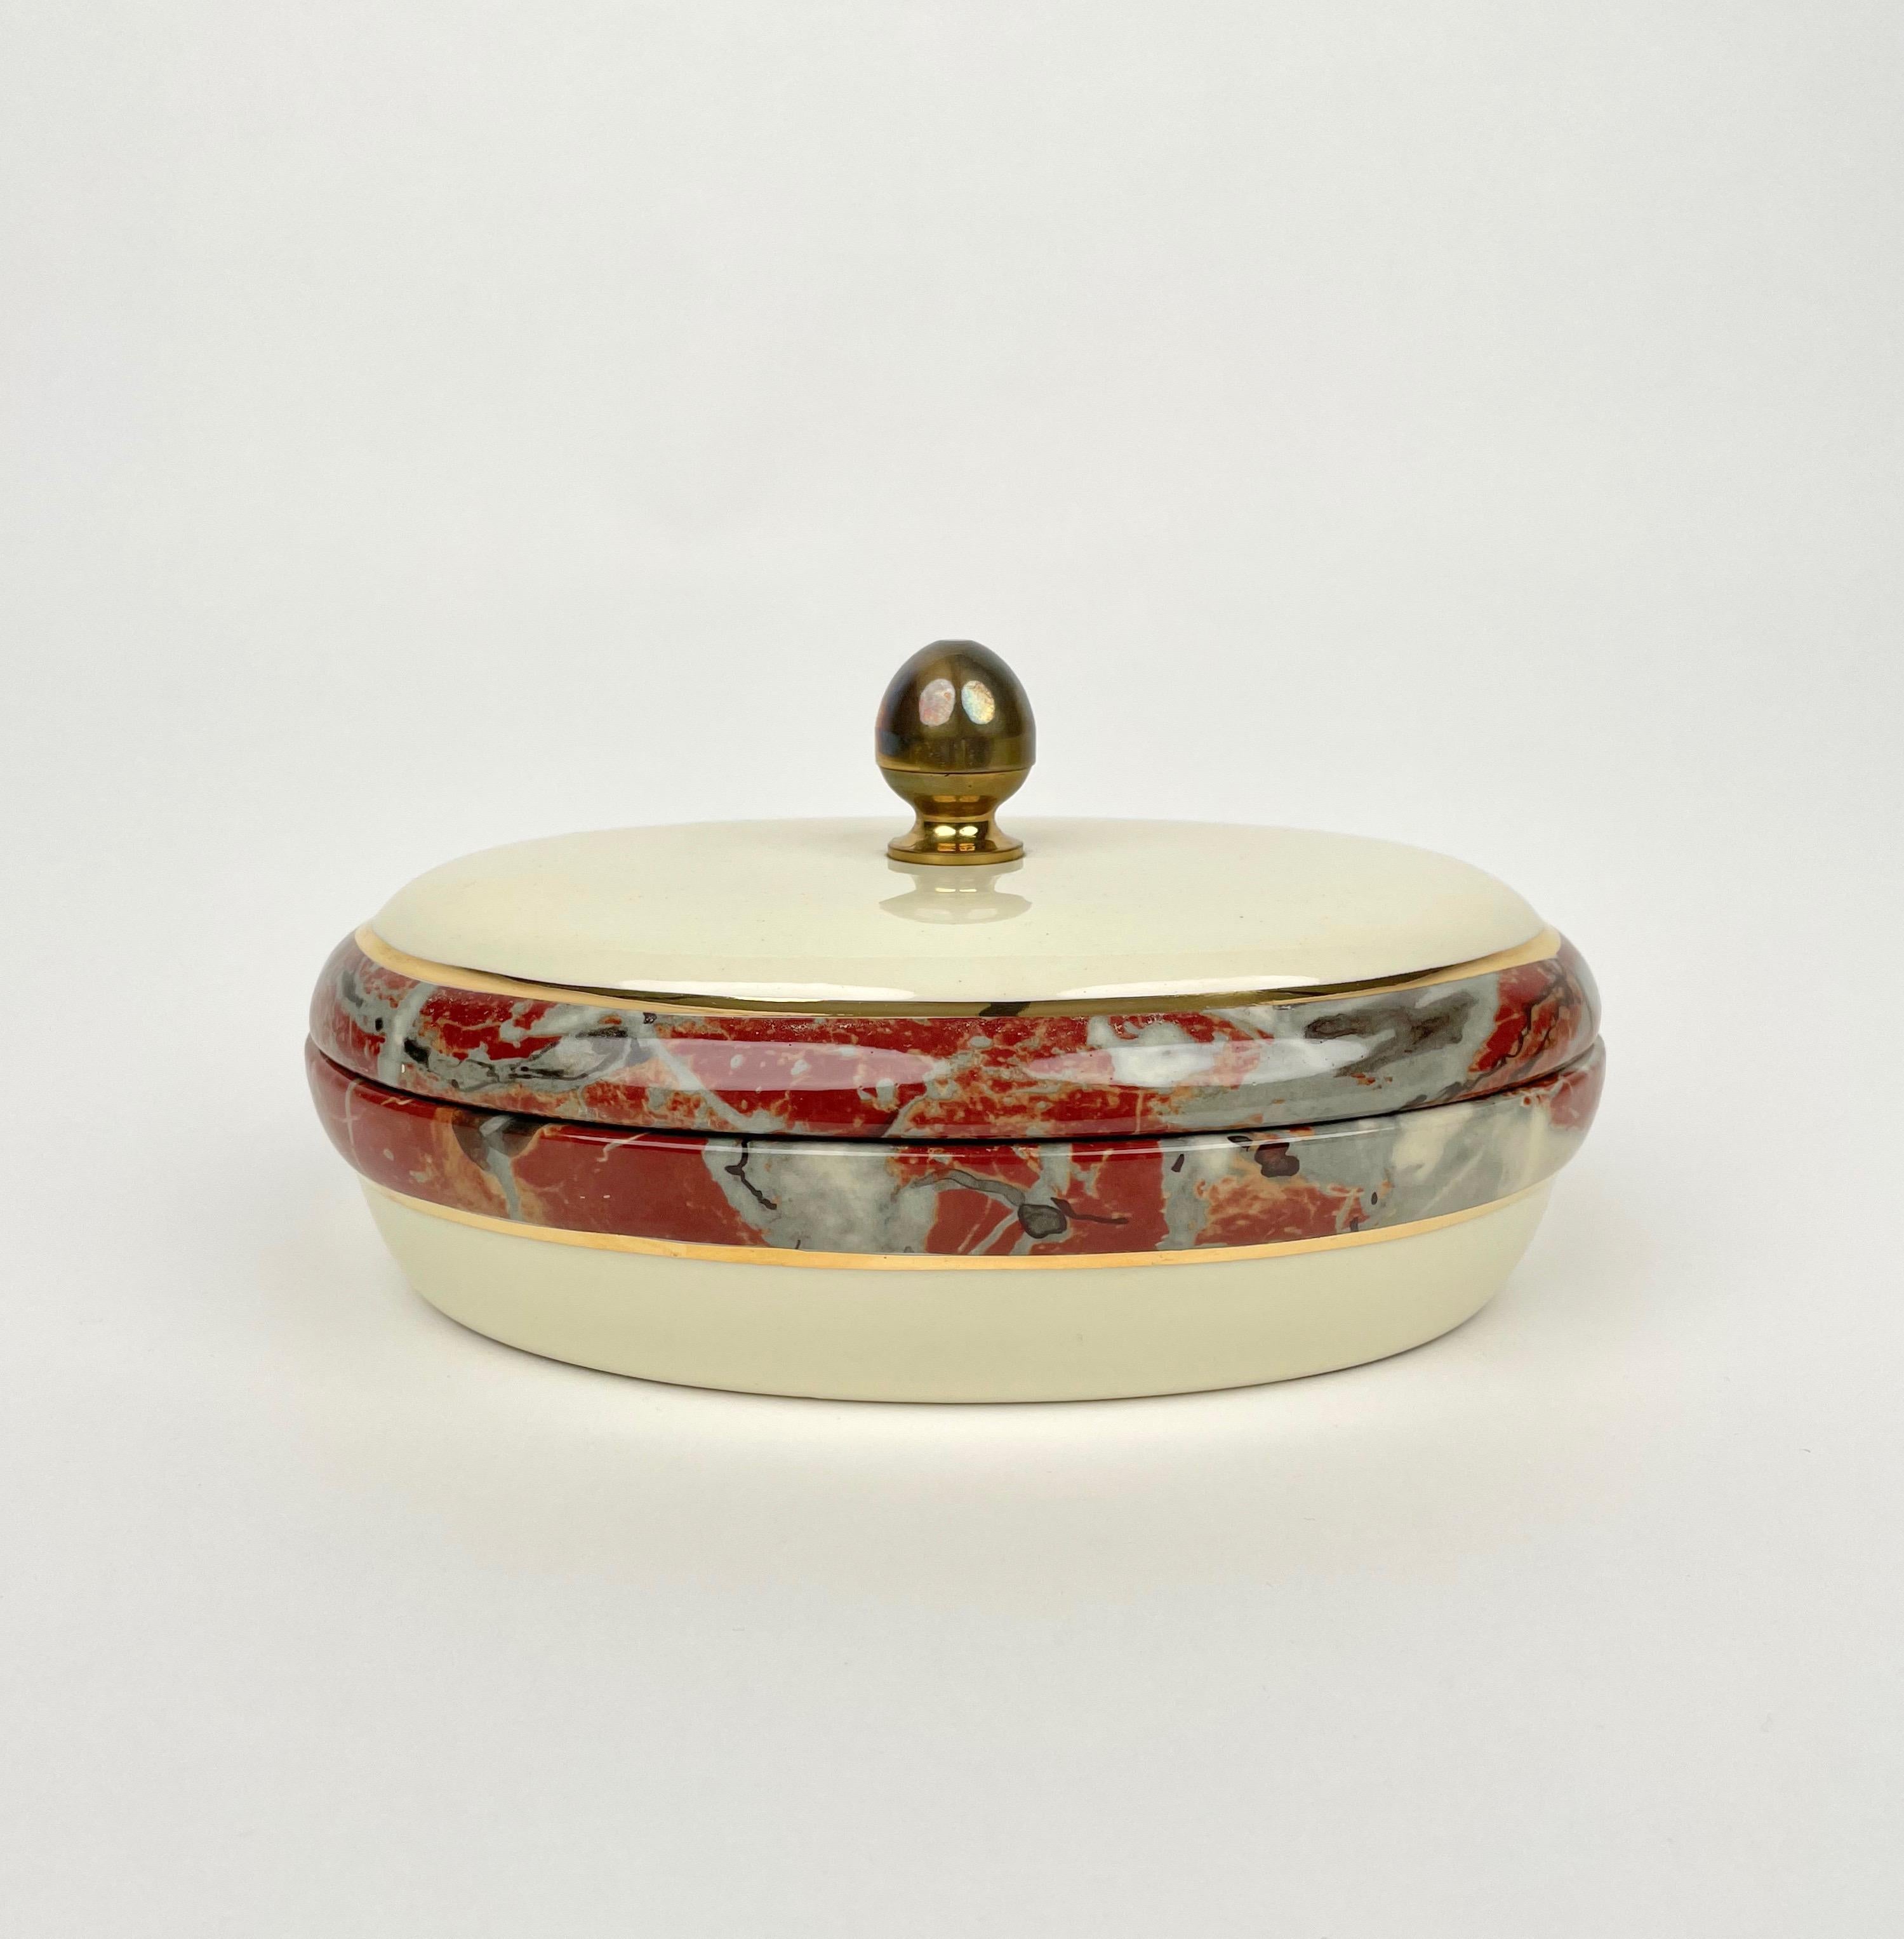 Oval box in ceramic with marble effect borders and brass handle by Tommaso Barbi for B Ceramiche made in Italy in the 1970s. 

The original label is still attached on the bottom, as shown in the photos.